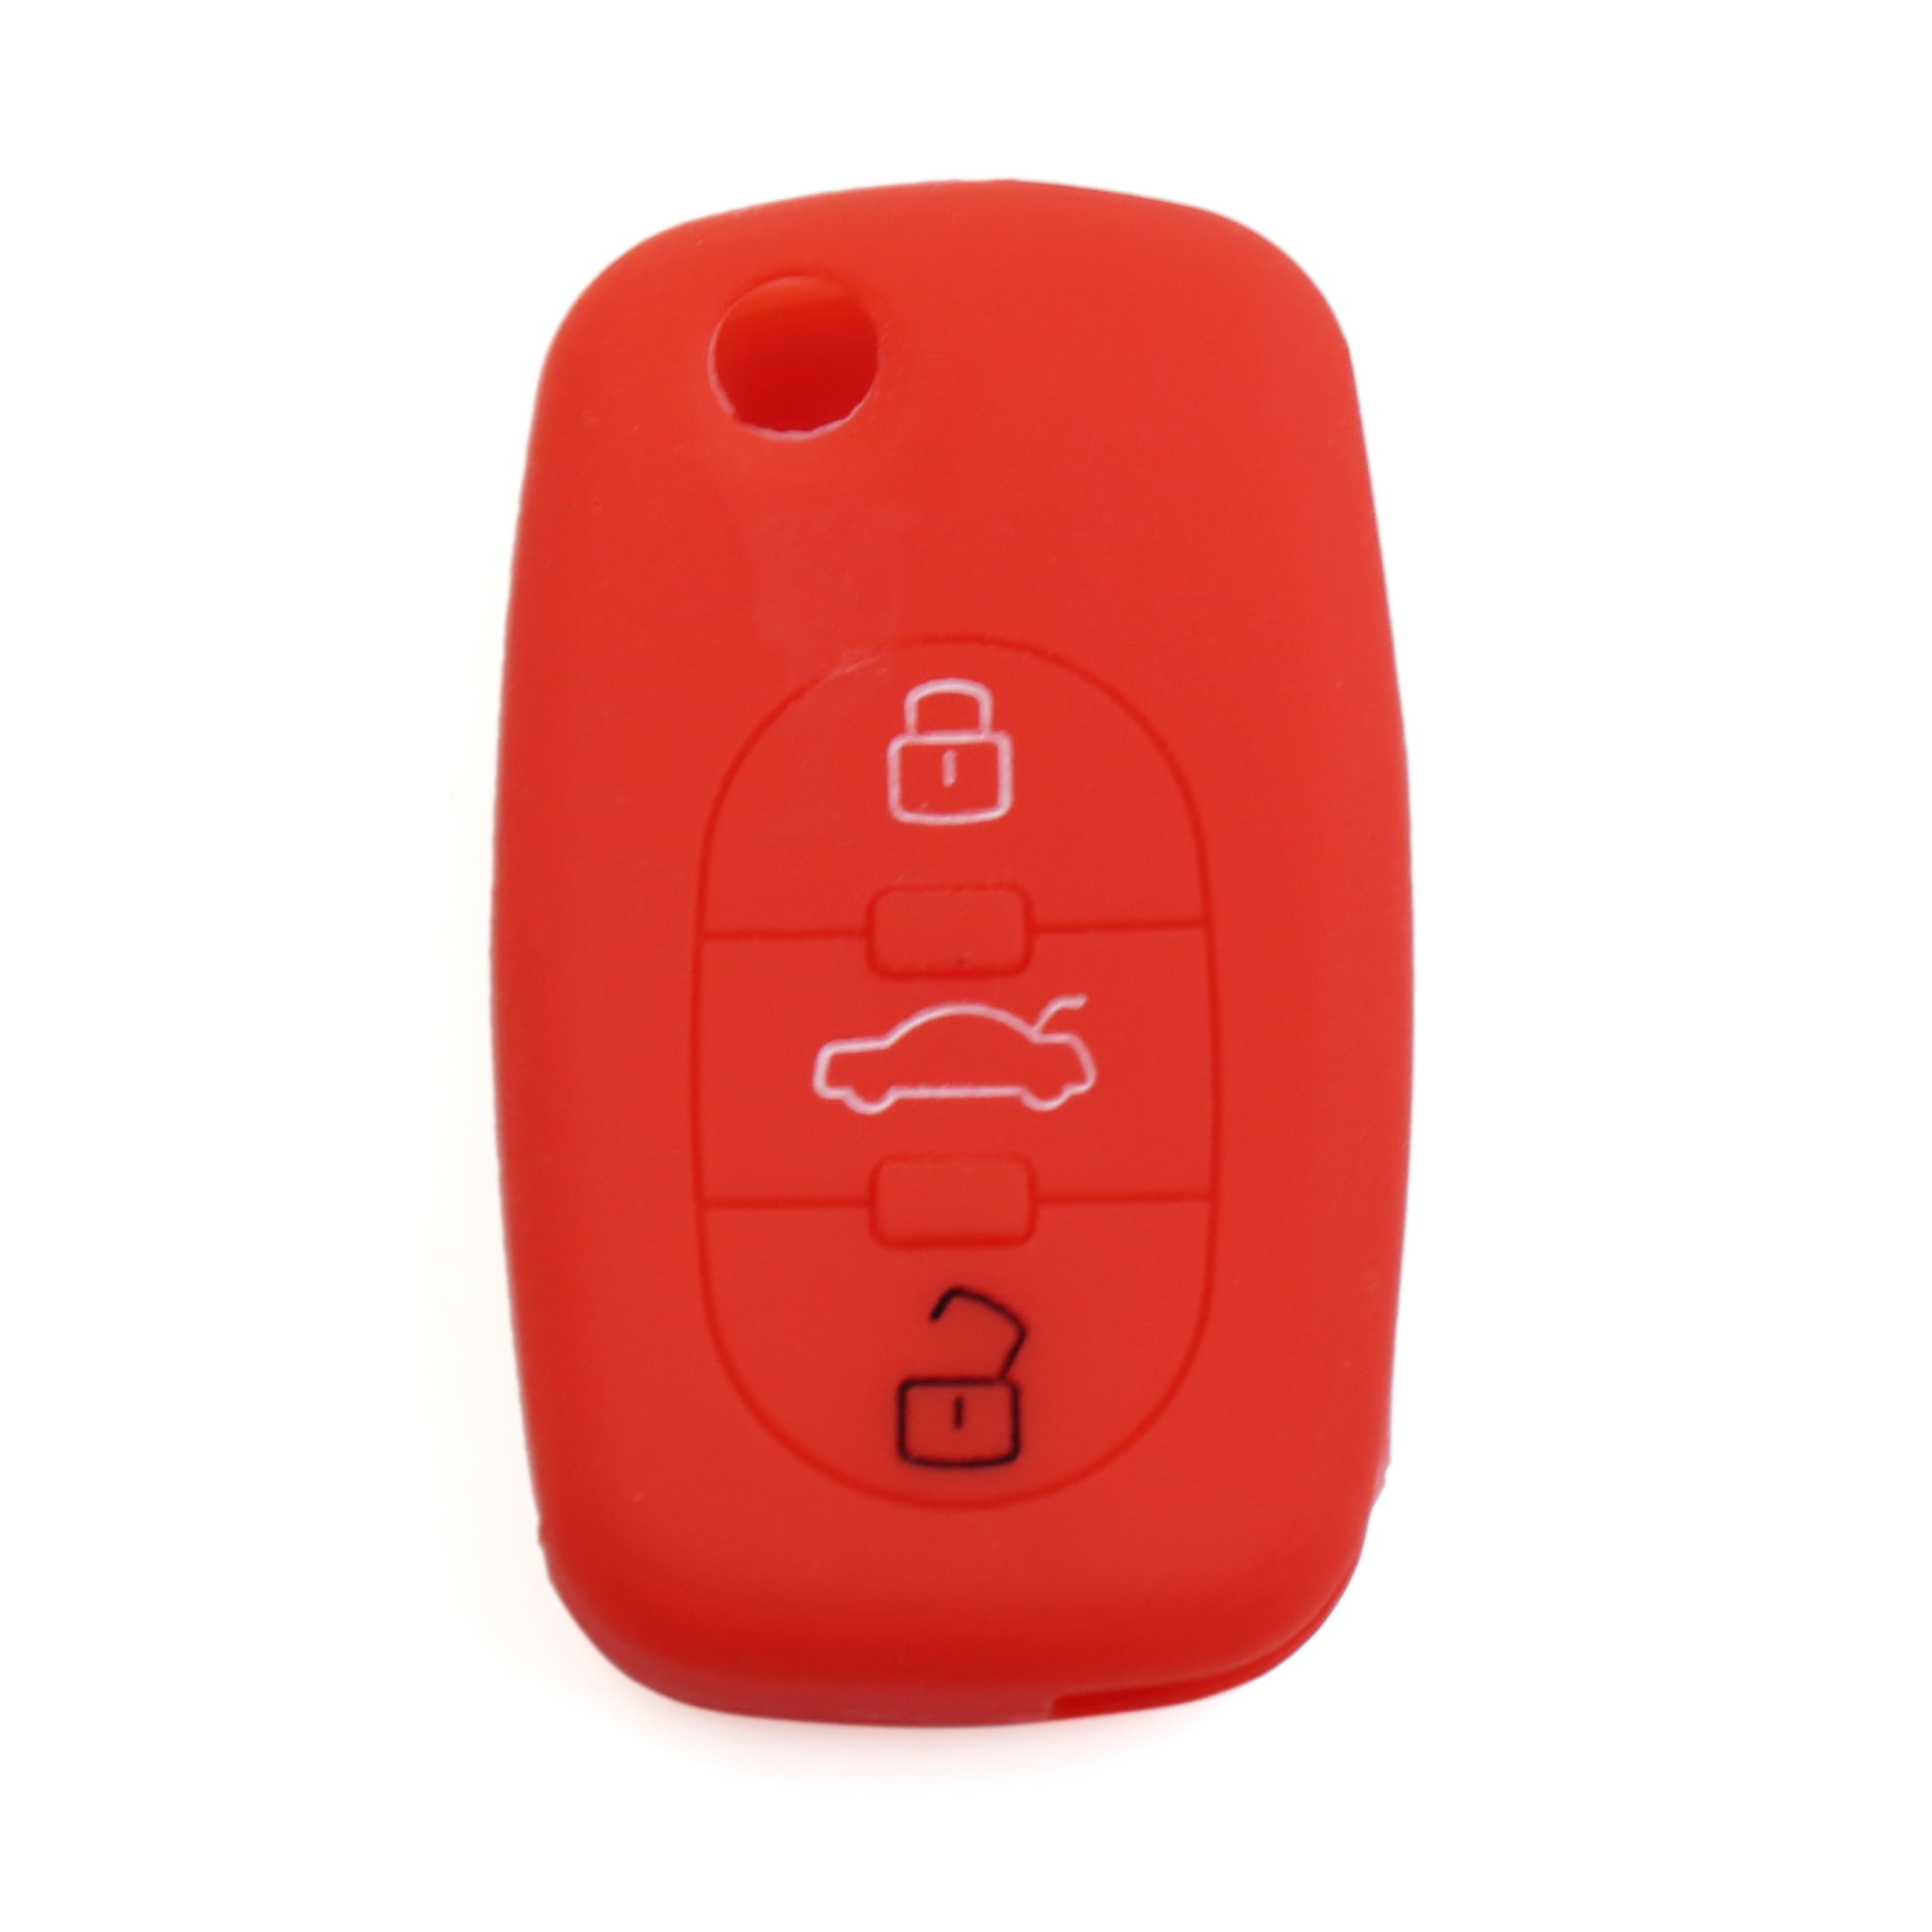 Red Silicone Cover Holder Flip Key Remote Key Fob Case fit for Mazda 3 5 6 